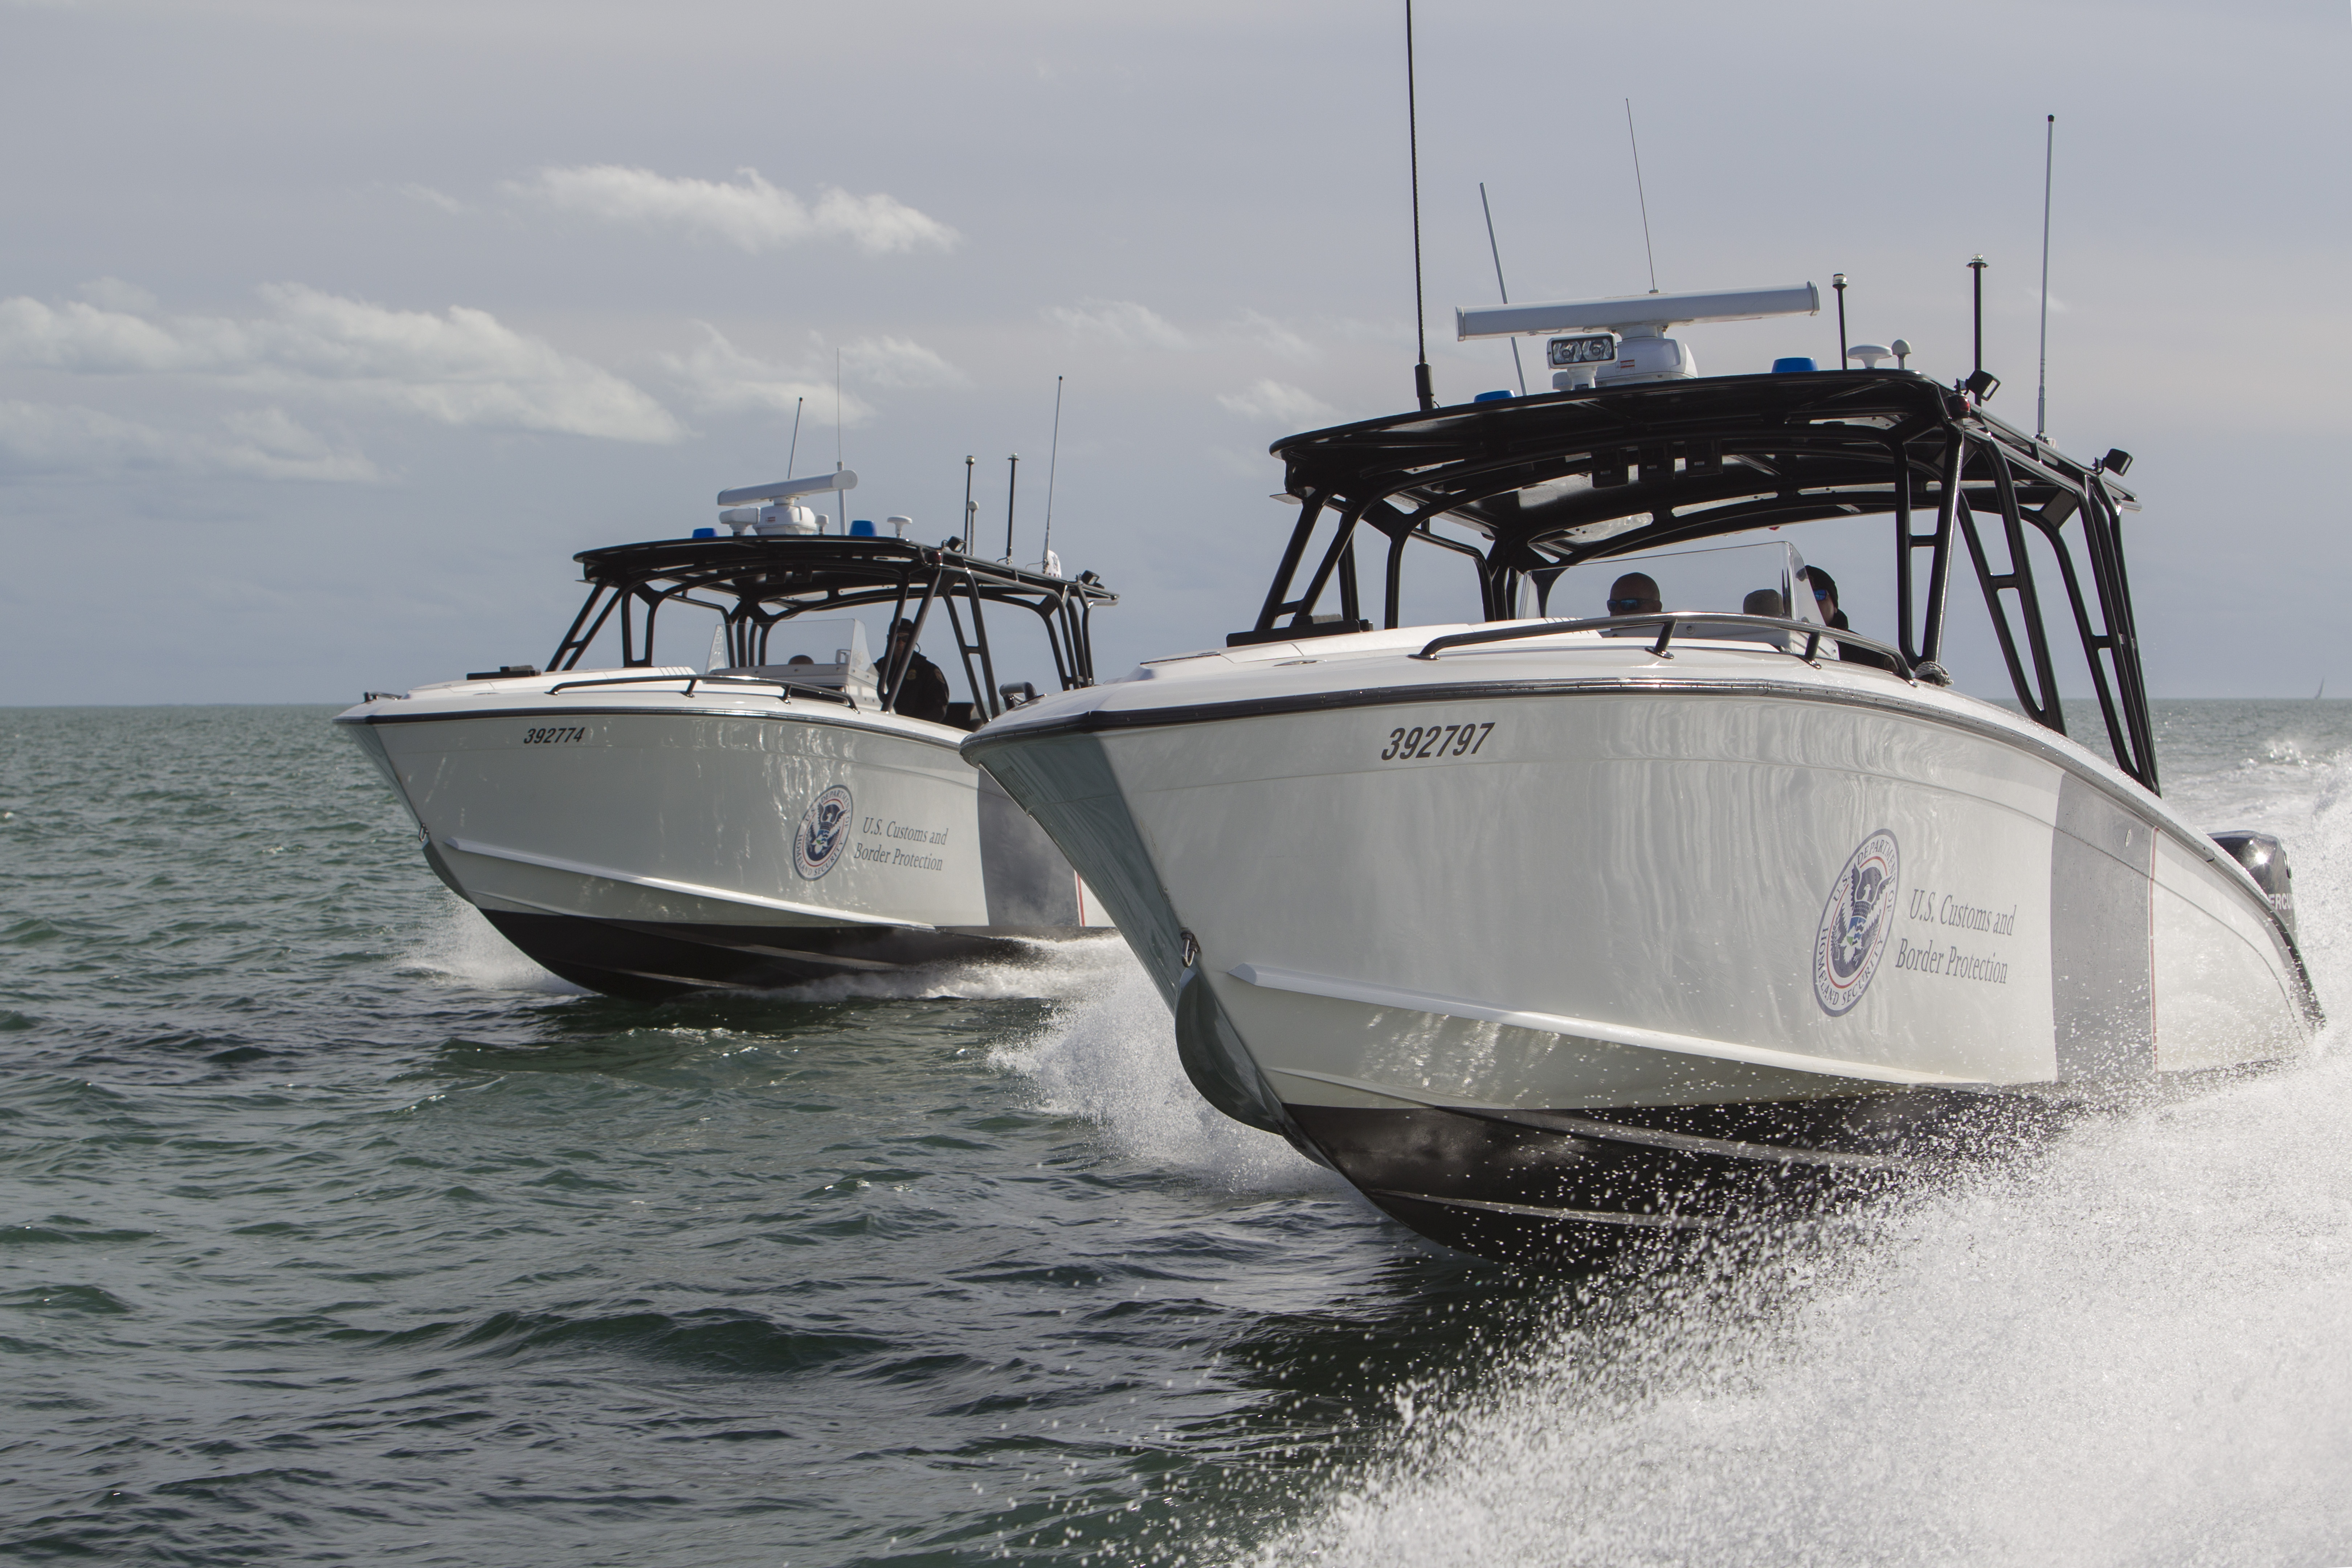 AMO crews patrol Miami waters in the Midnight Express Interceptor vessel to ensure safety in matters of border security. Photographer: Donna Burton